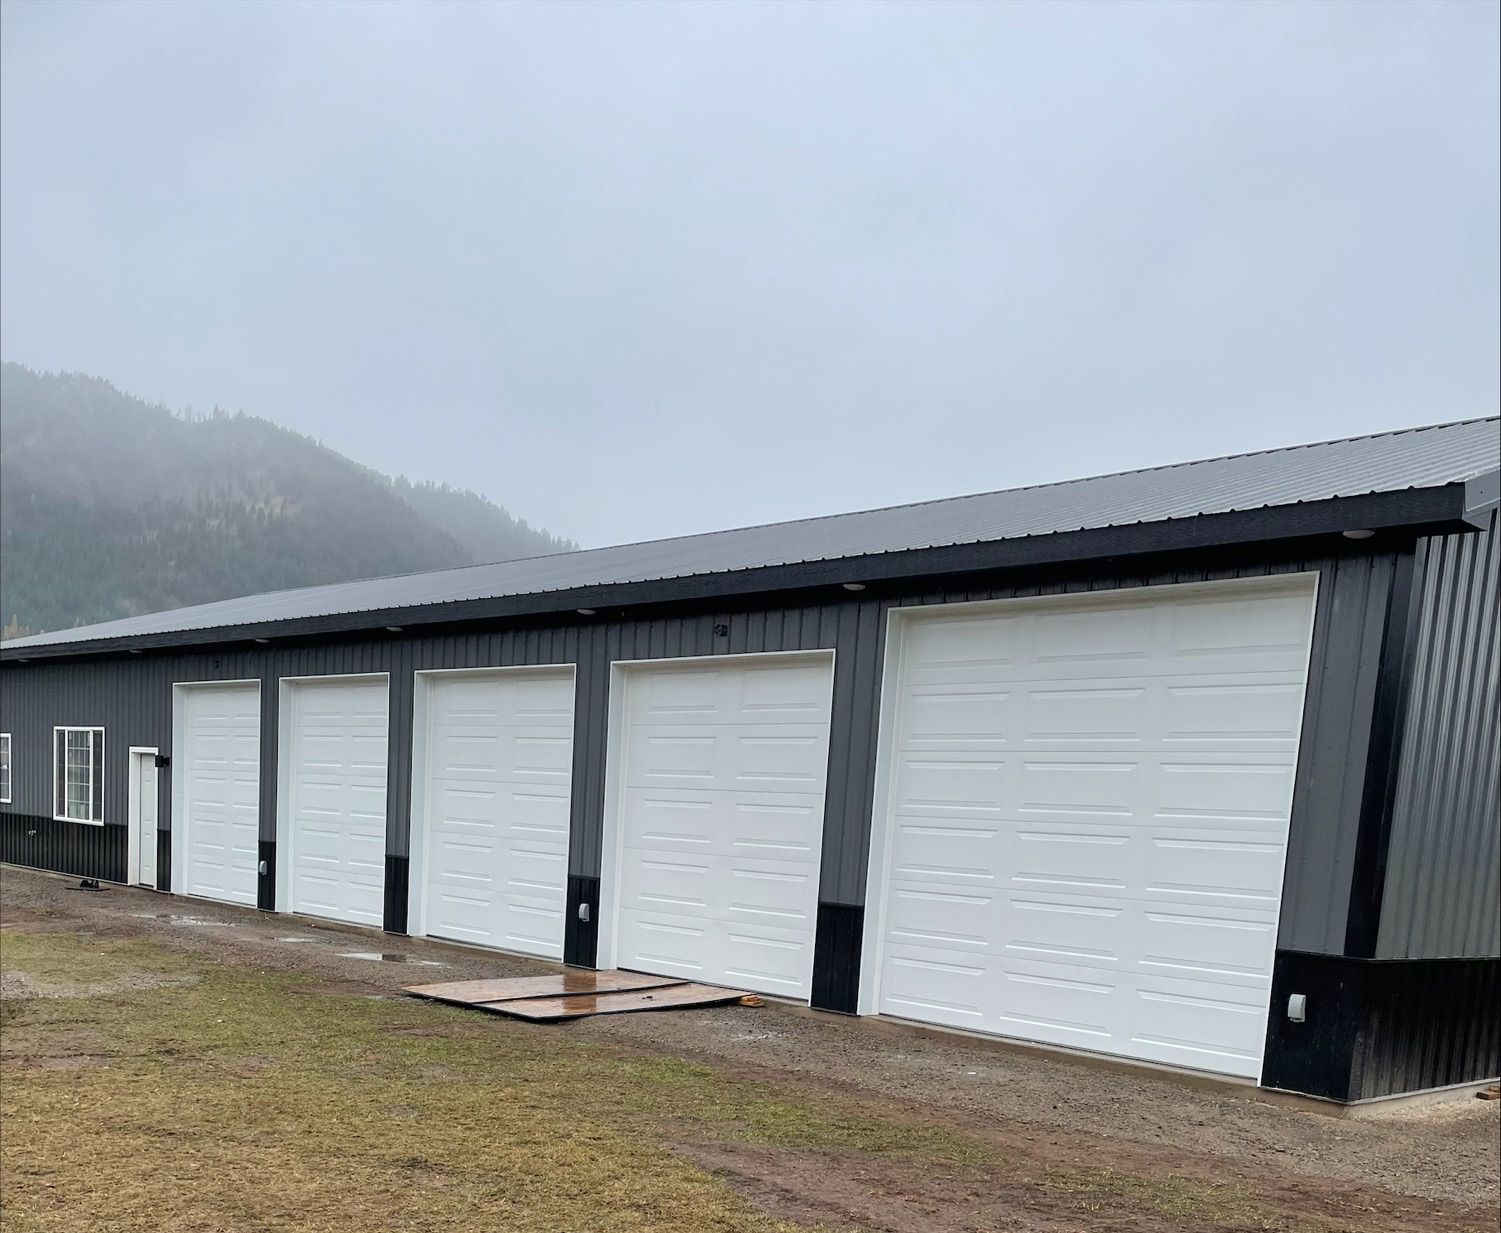 Meridian Construction Company, Montana, Wood-Framed Commercial, Warehouse,  Steel Siding, Steel Roofing